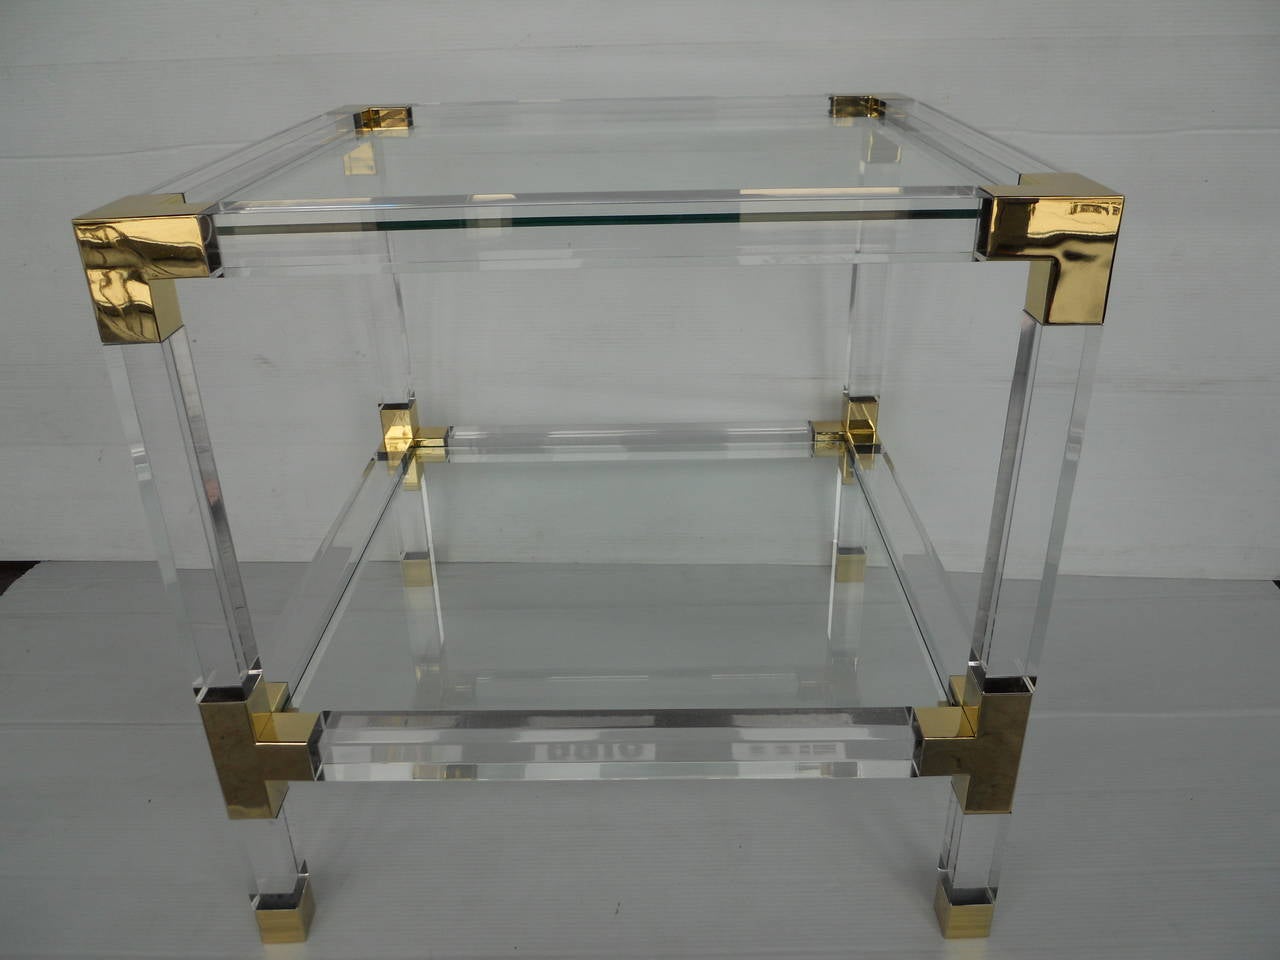 Pair of Charles Hollis Jones metric side tables with brass hardware 
glass top
tasteful and sleek look with chrome and brass combination.